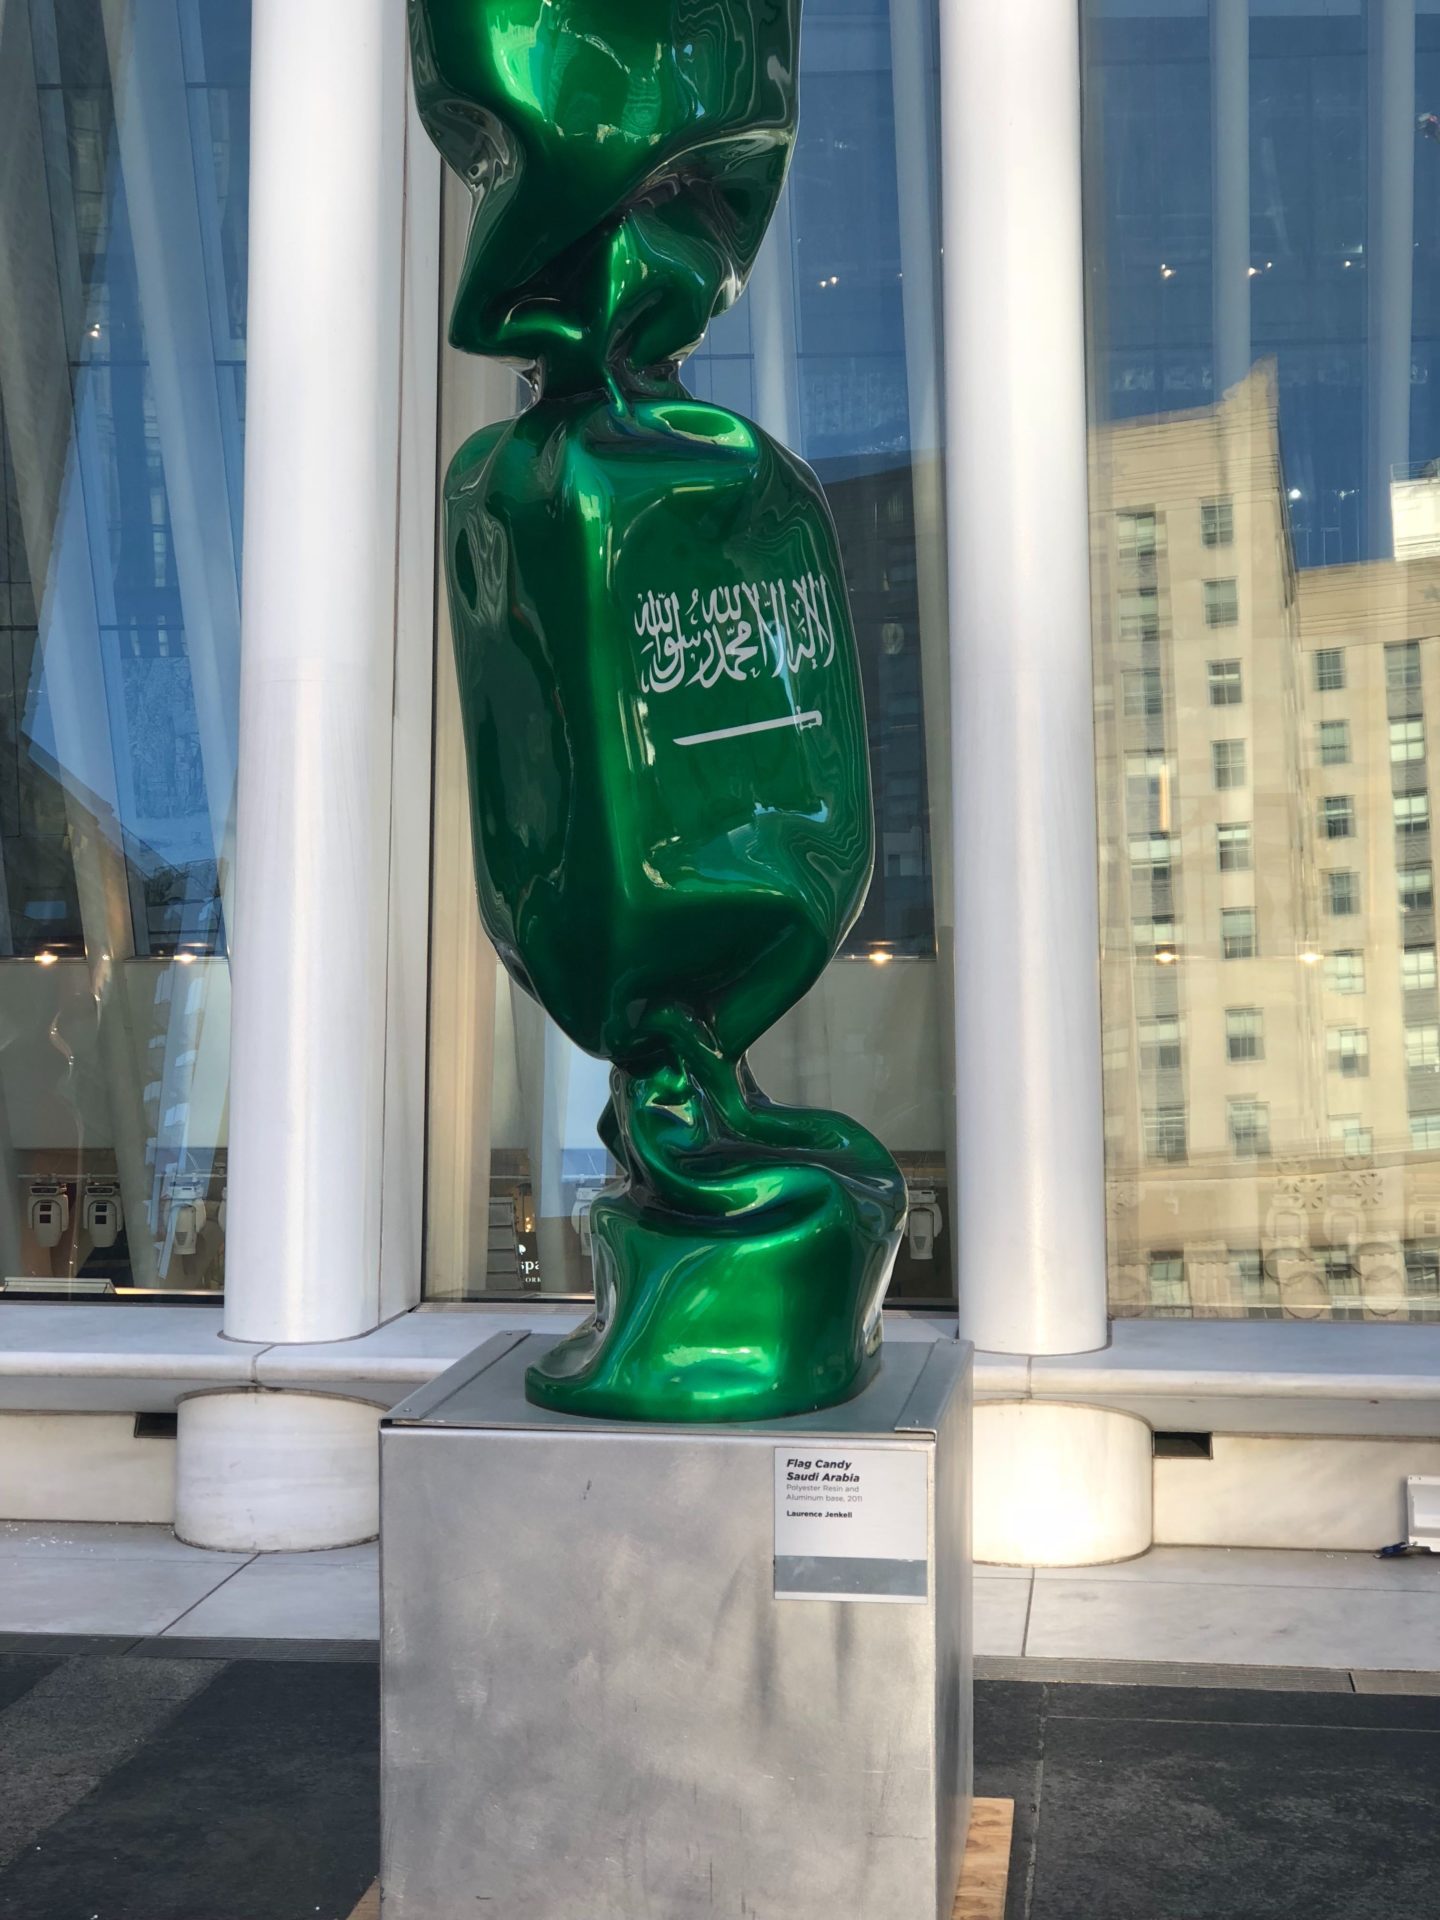 After an Outcry, a Public Art Installation Featuring the Saudi Flag Is ...